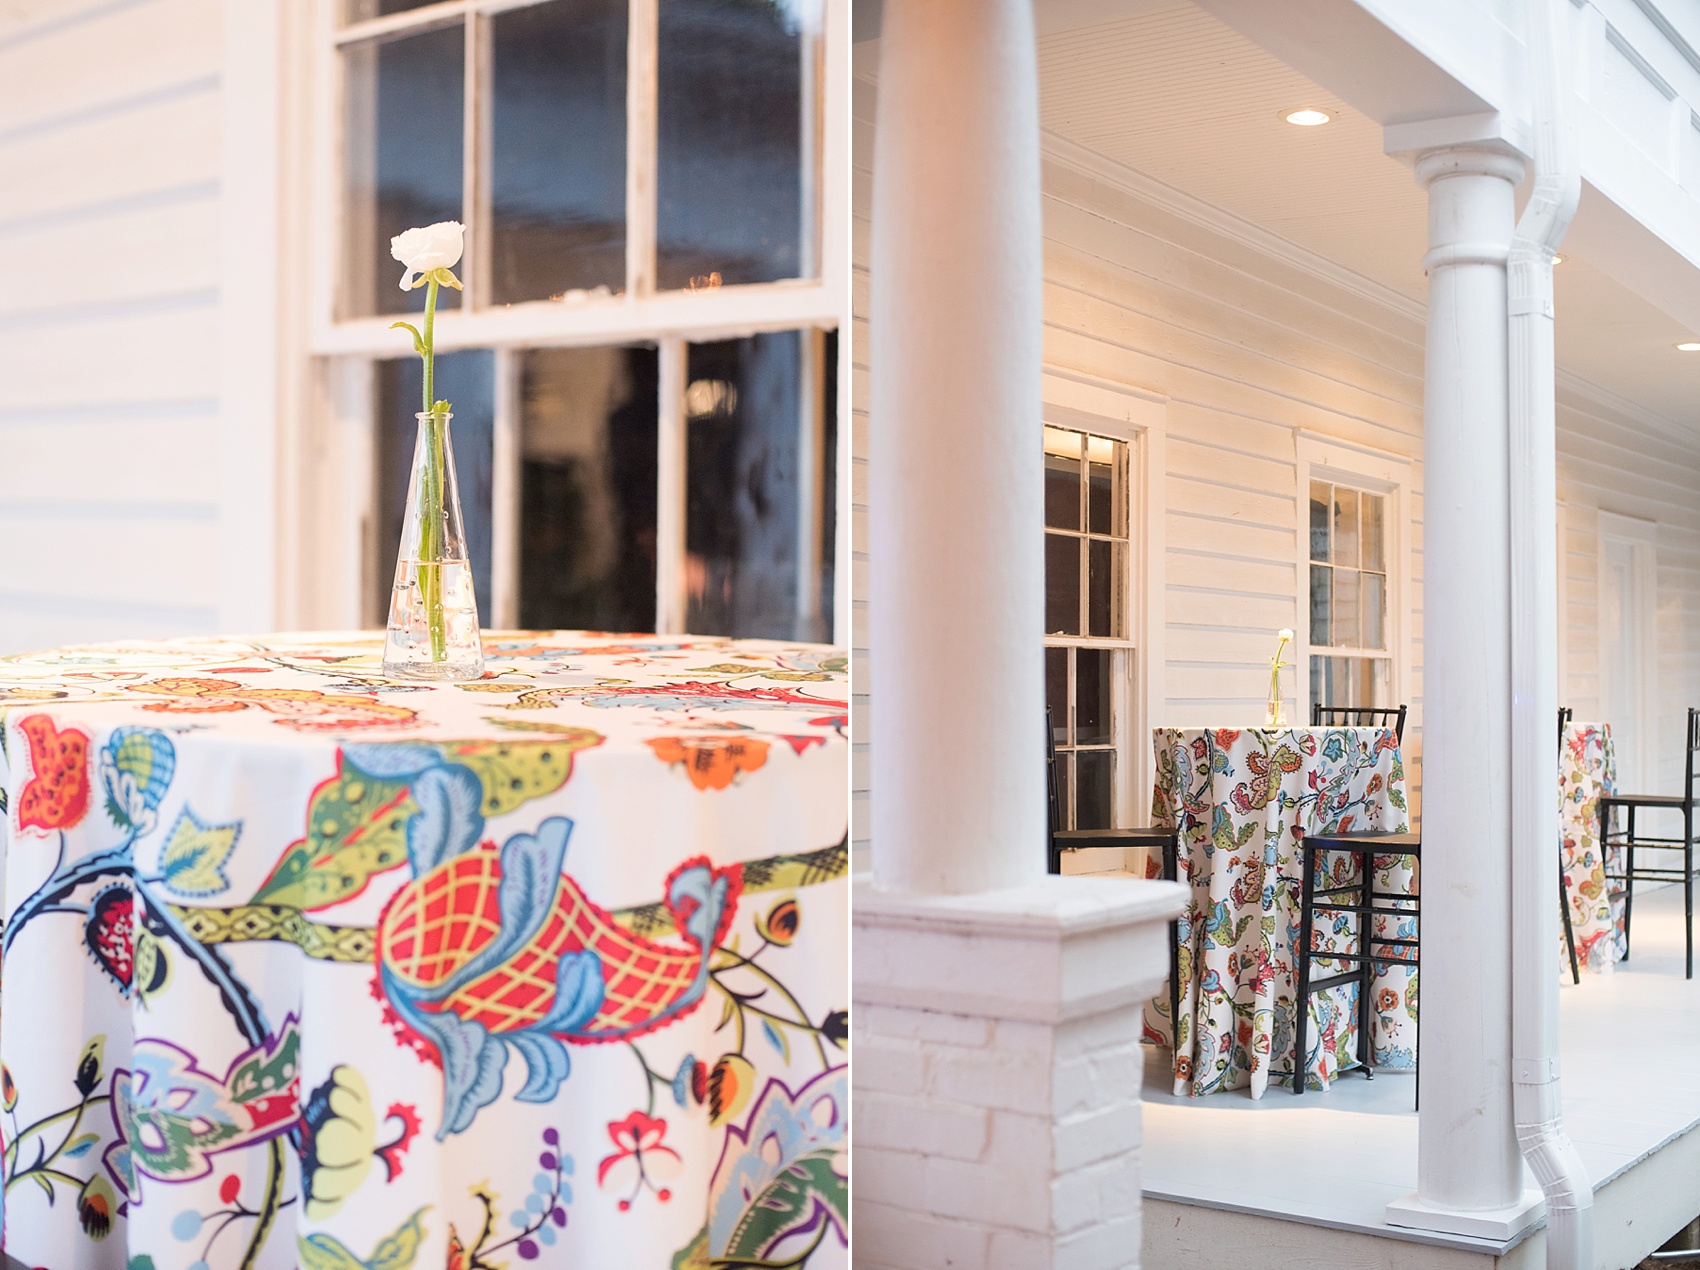 Raleigh wedding photographer Mikkel Paige captures Mim's House opening night, with an Alice in Wonderland theme and floral arrangements by Eclectic Sage and linens from CE Rental.